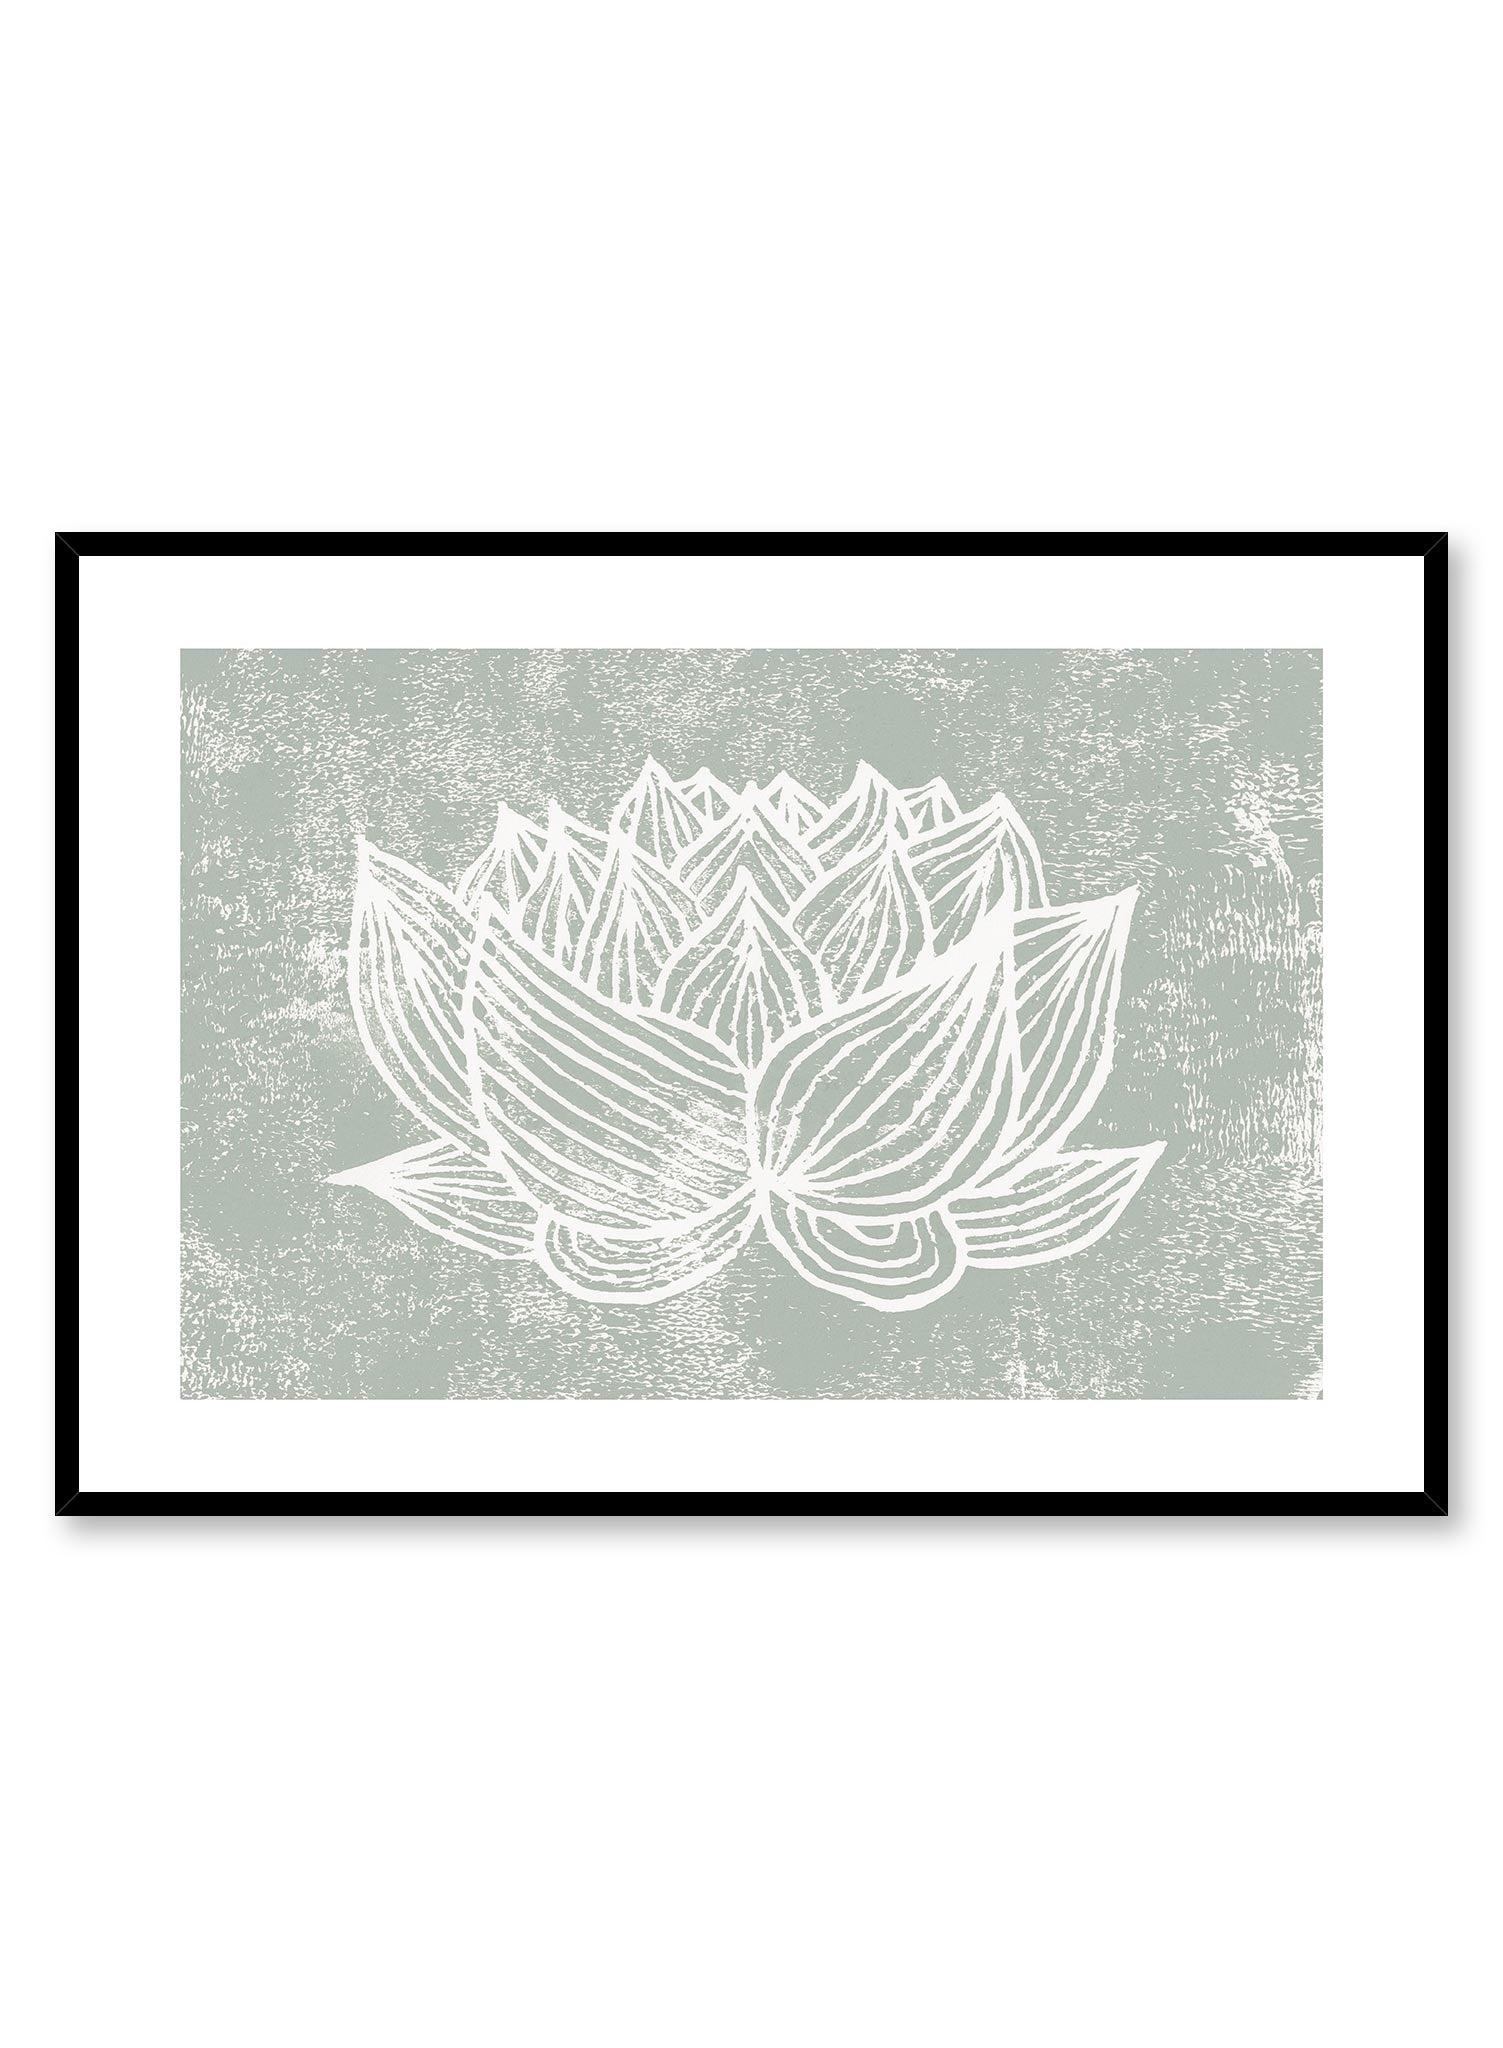 Lotus is a minimalist illustration by Opposite Wall of a huge lotus flower resembling a centerpiece.